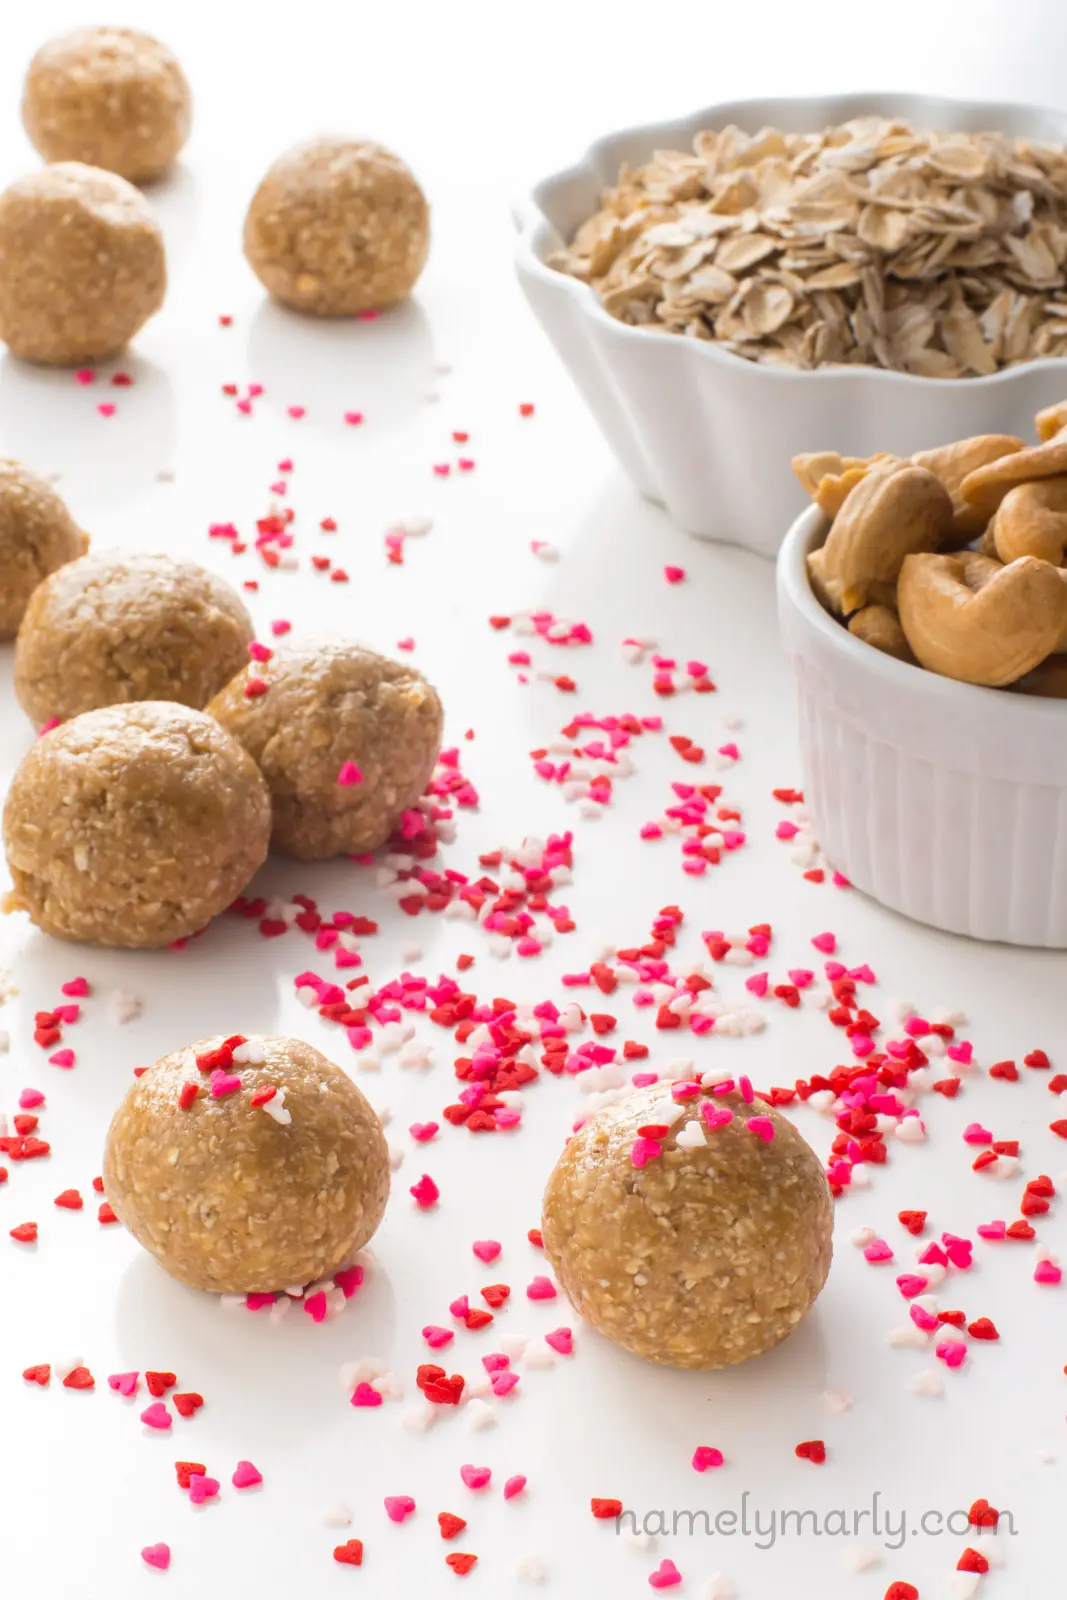 Several sugar cookie energy bites sit on a table. There are pink, red, and white heart-shaped sprinkles all around the table and on some of the energy bites. Beside them are two bowls, one with cashews and one with oatmeal.